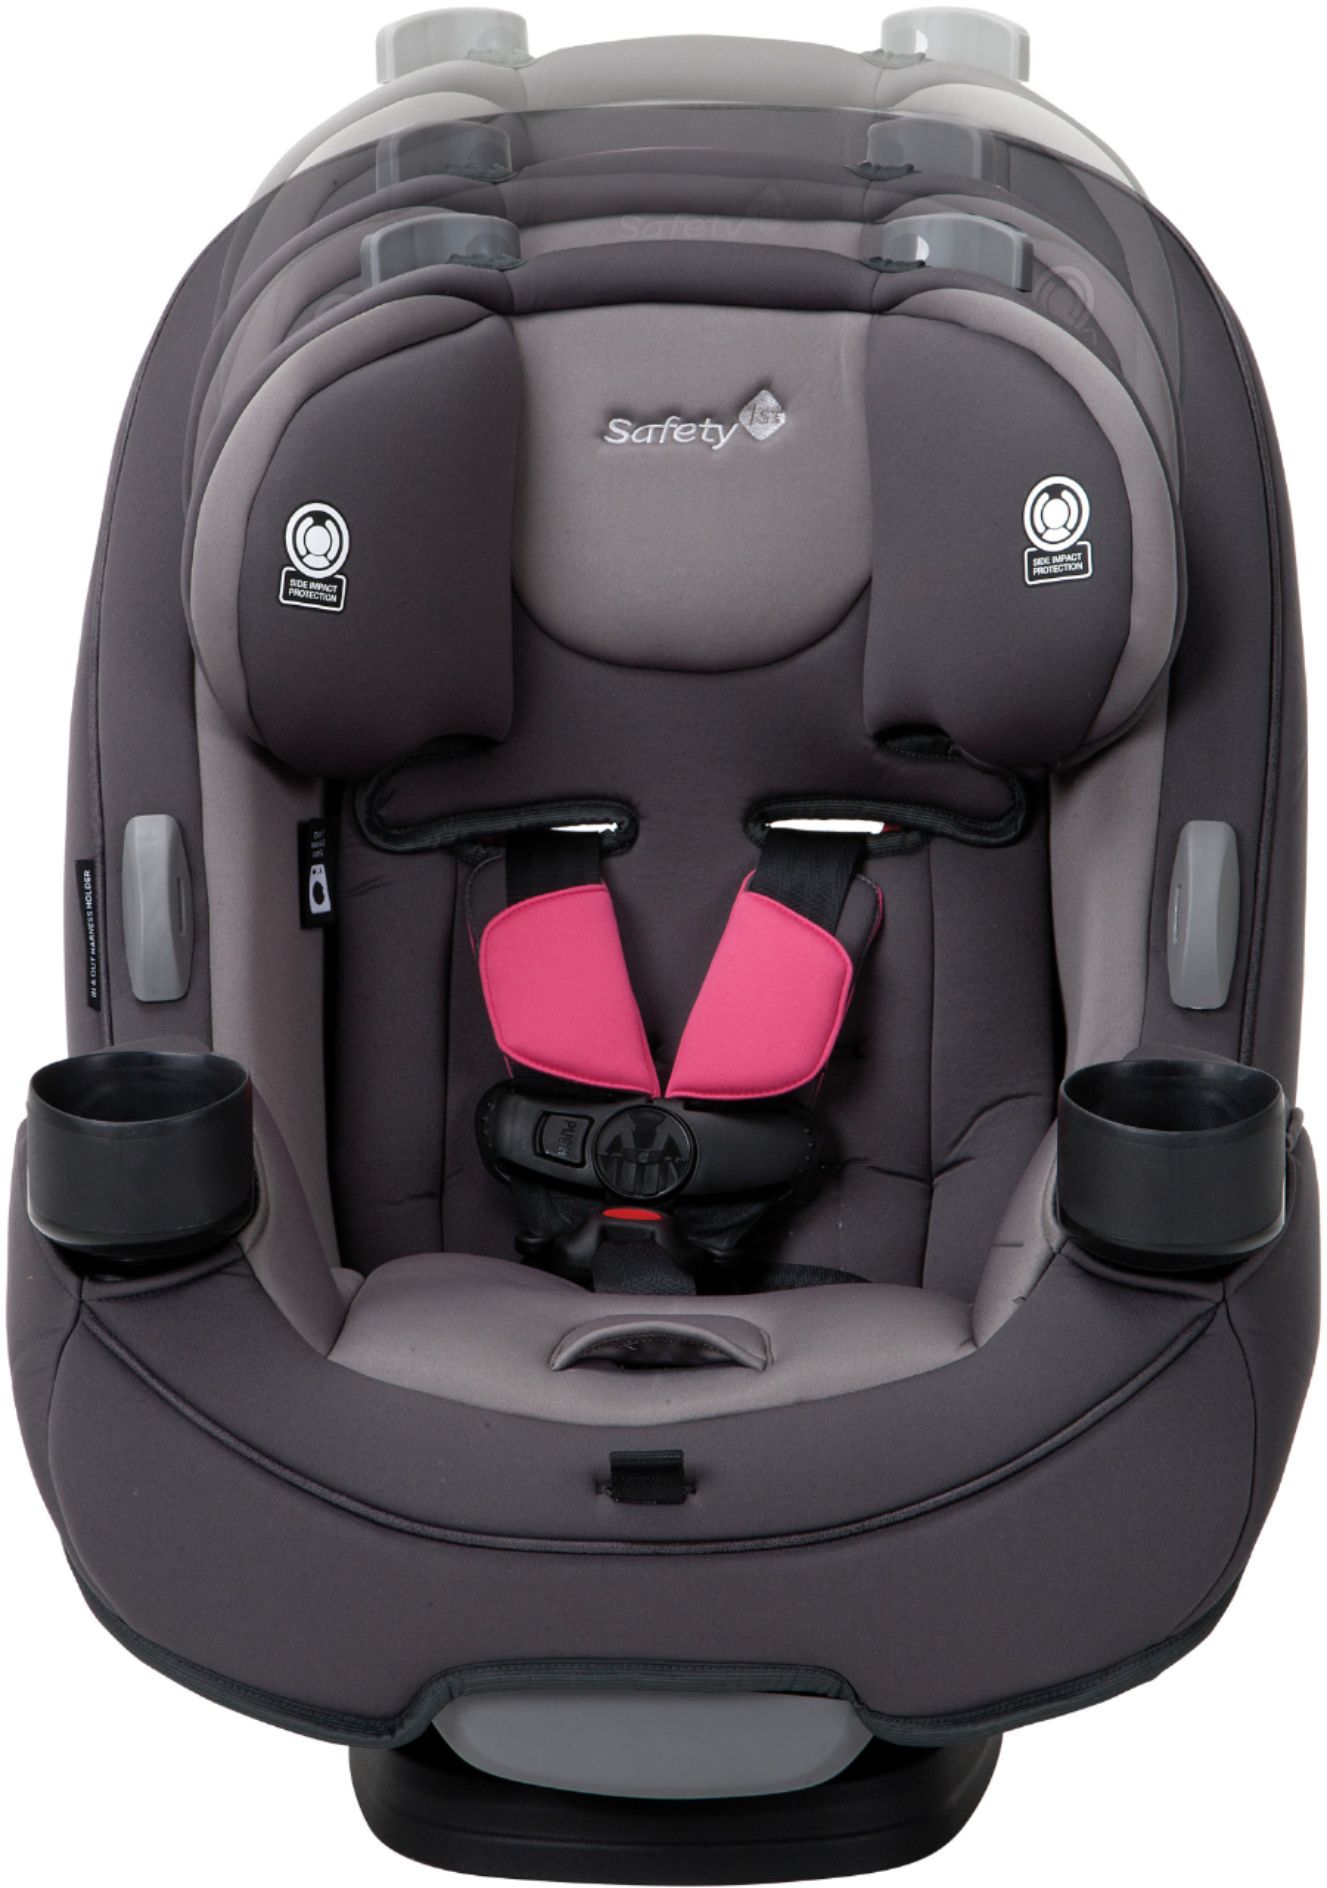 Safety 1st Grow And Go 3-in-1 Convertible Baby Infants Car Seats Everest Pink 